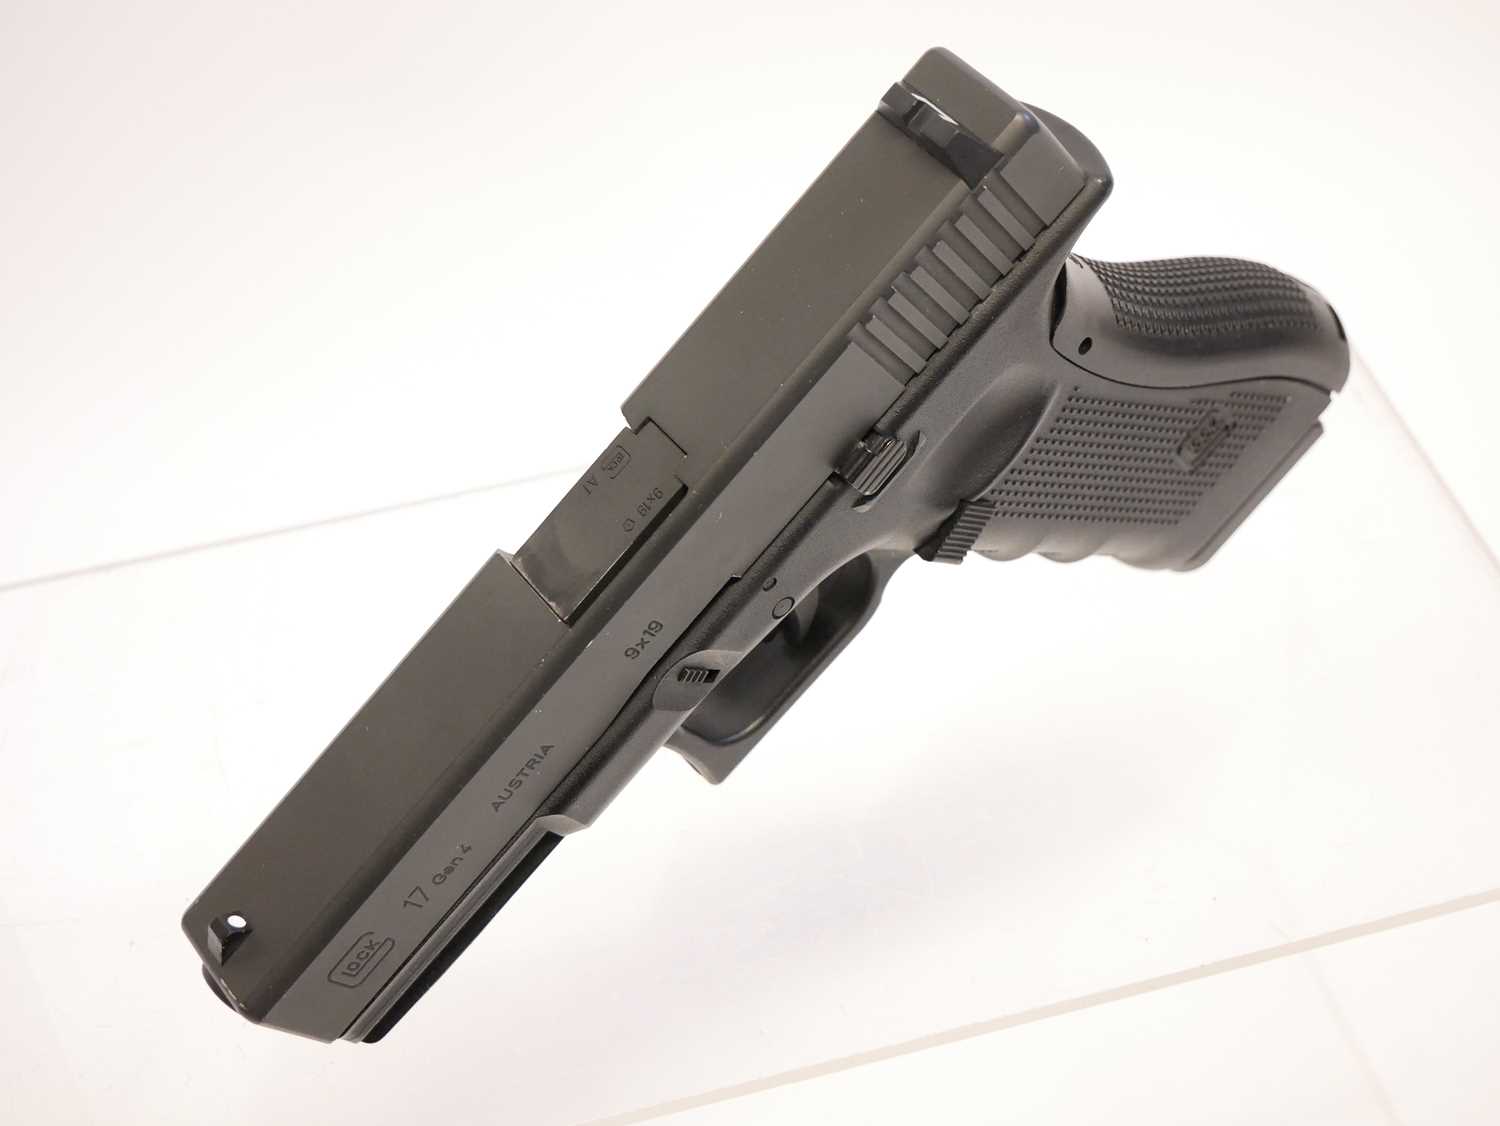 Umarex Glock 17 generation 4 .177 BB CO2 air pistol, serial number KGU417, with box and one - Image 7 of 8